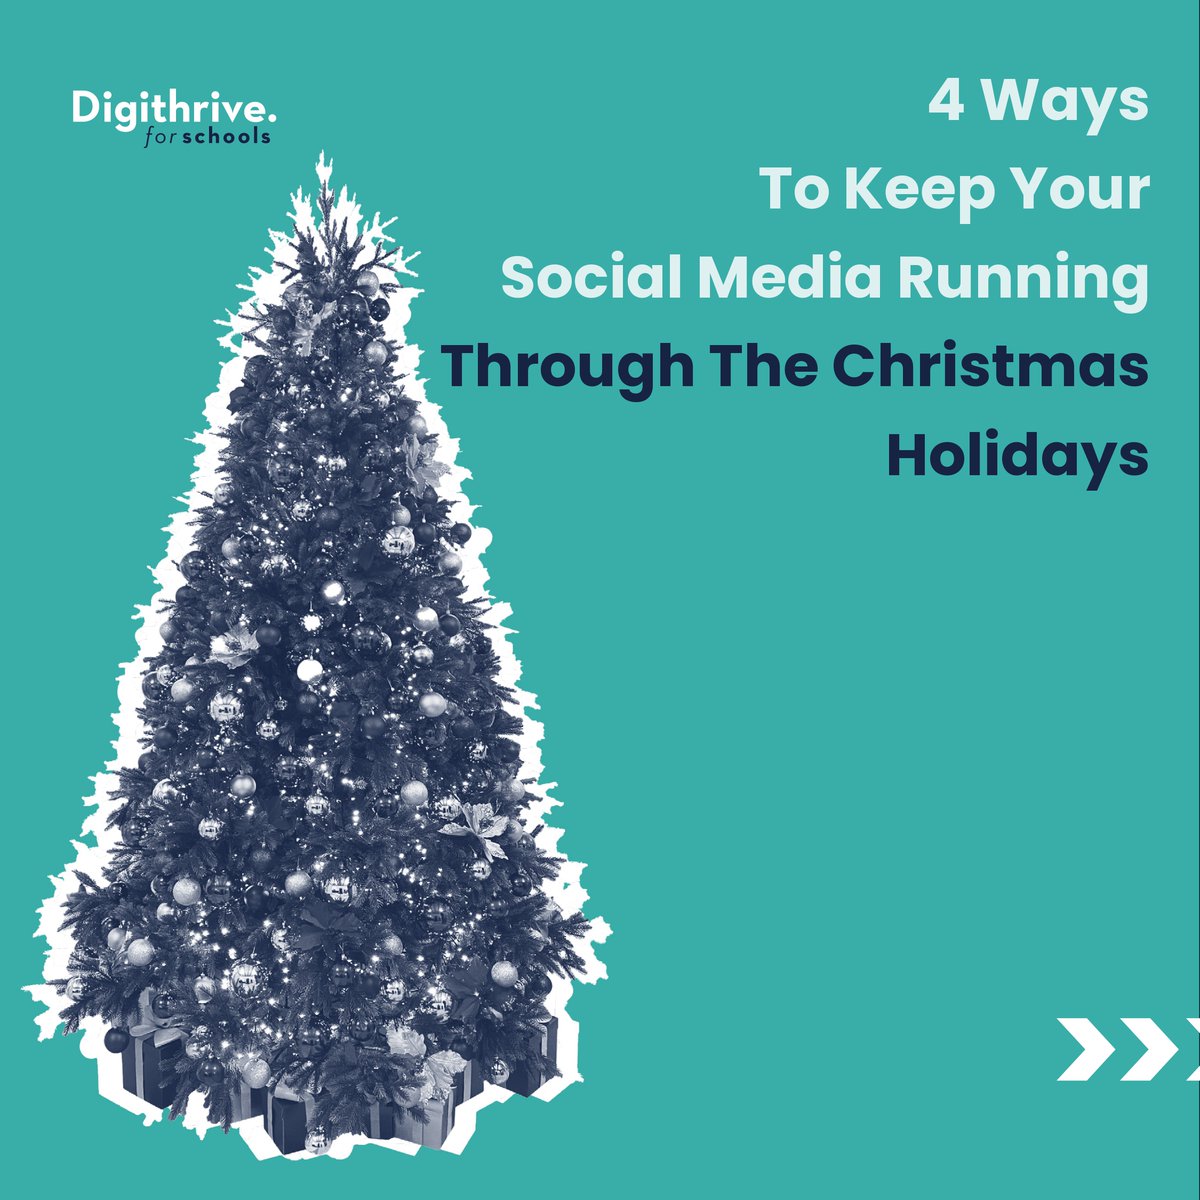 Do you want to keep the momentum going during the holidays? Don’t let prospective parents and students get cold over the winter break… Read our guide ‘Keeping Your Social Media Running Through The Christmas Holidays’ to find out more! 👀 bit.ly/47M9rK3
#inspiringschools